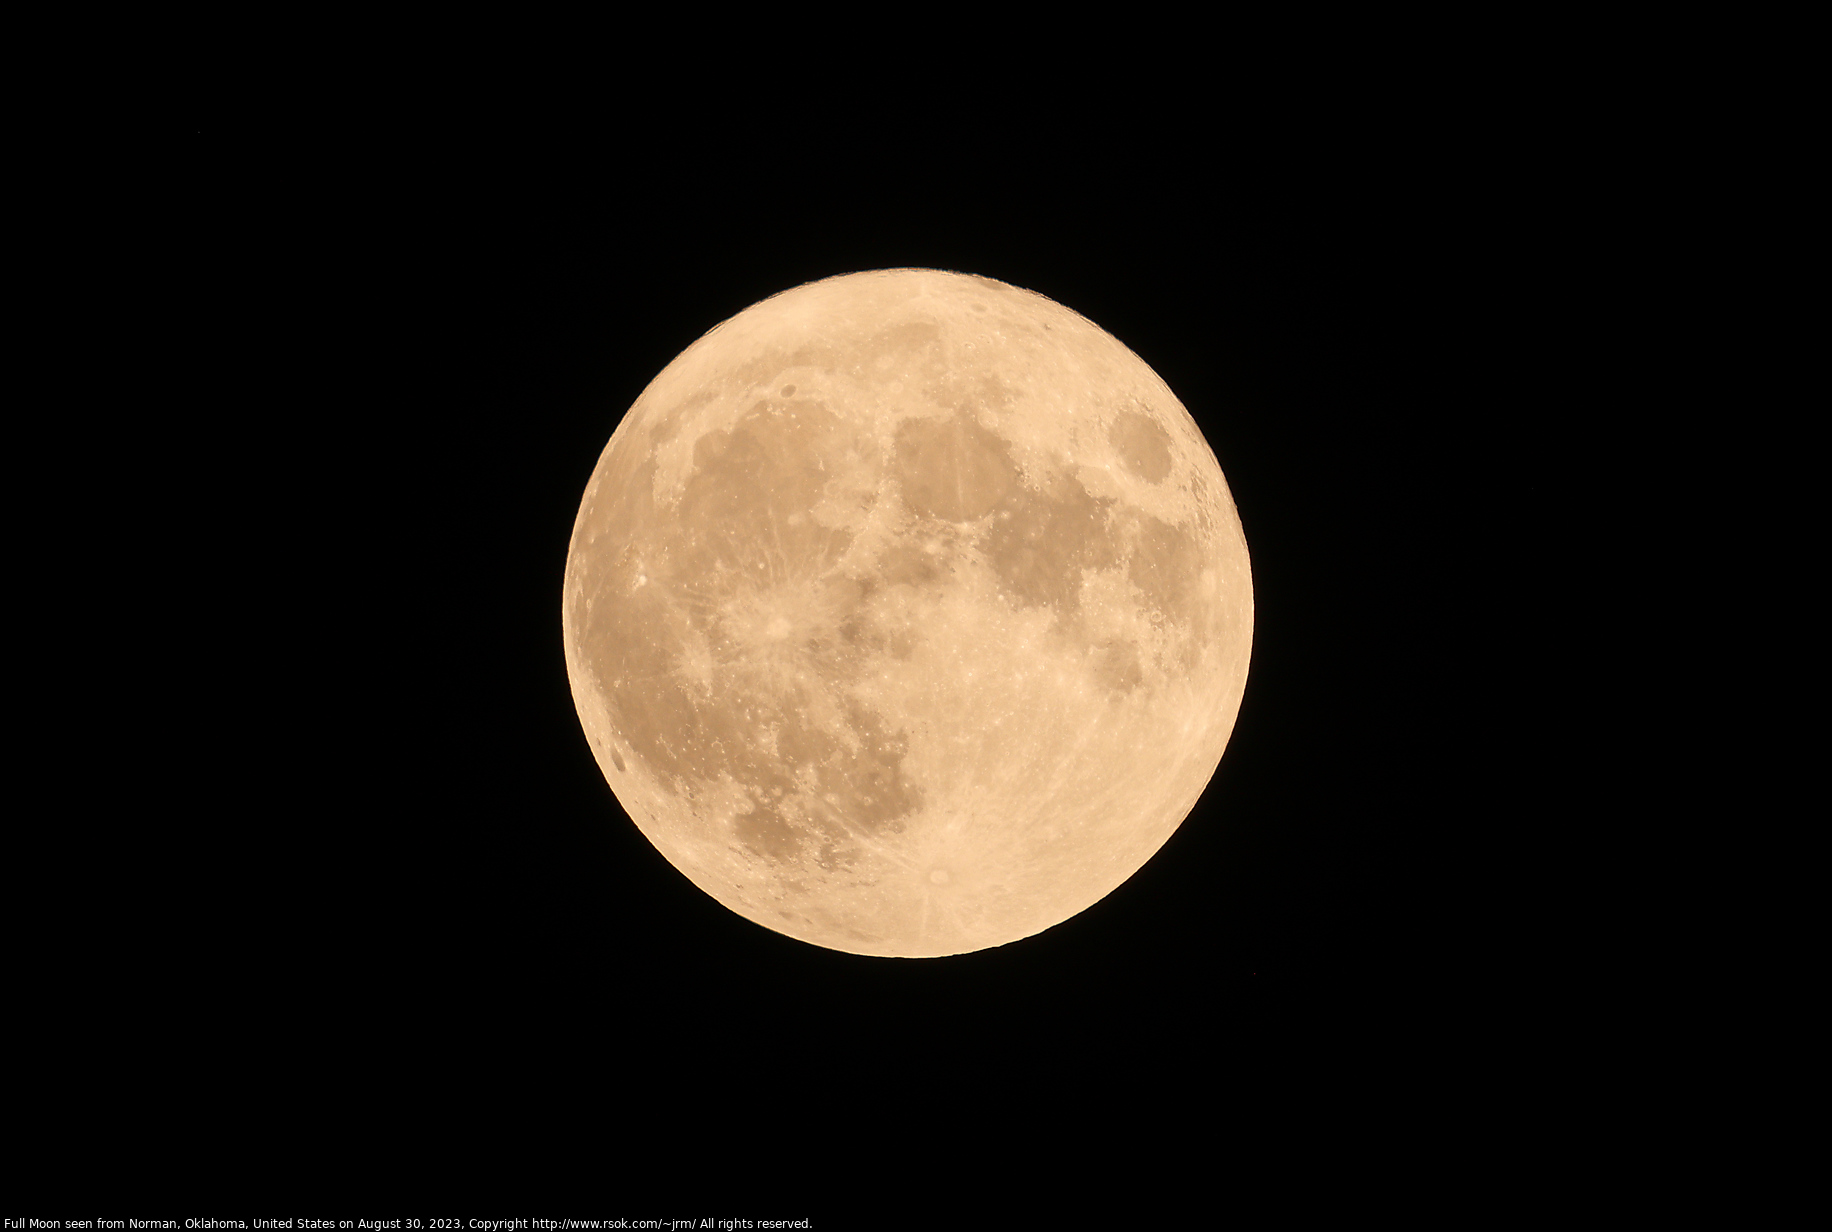 Full Moon seen from Norman, Oklahoma, United States on August 30, 2023